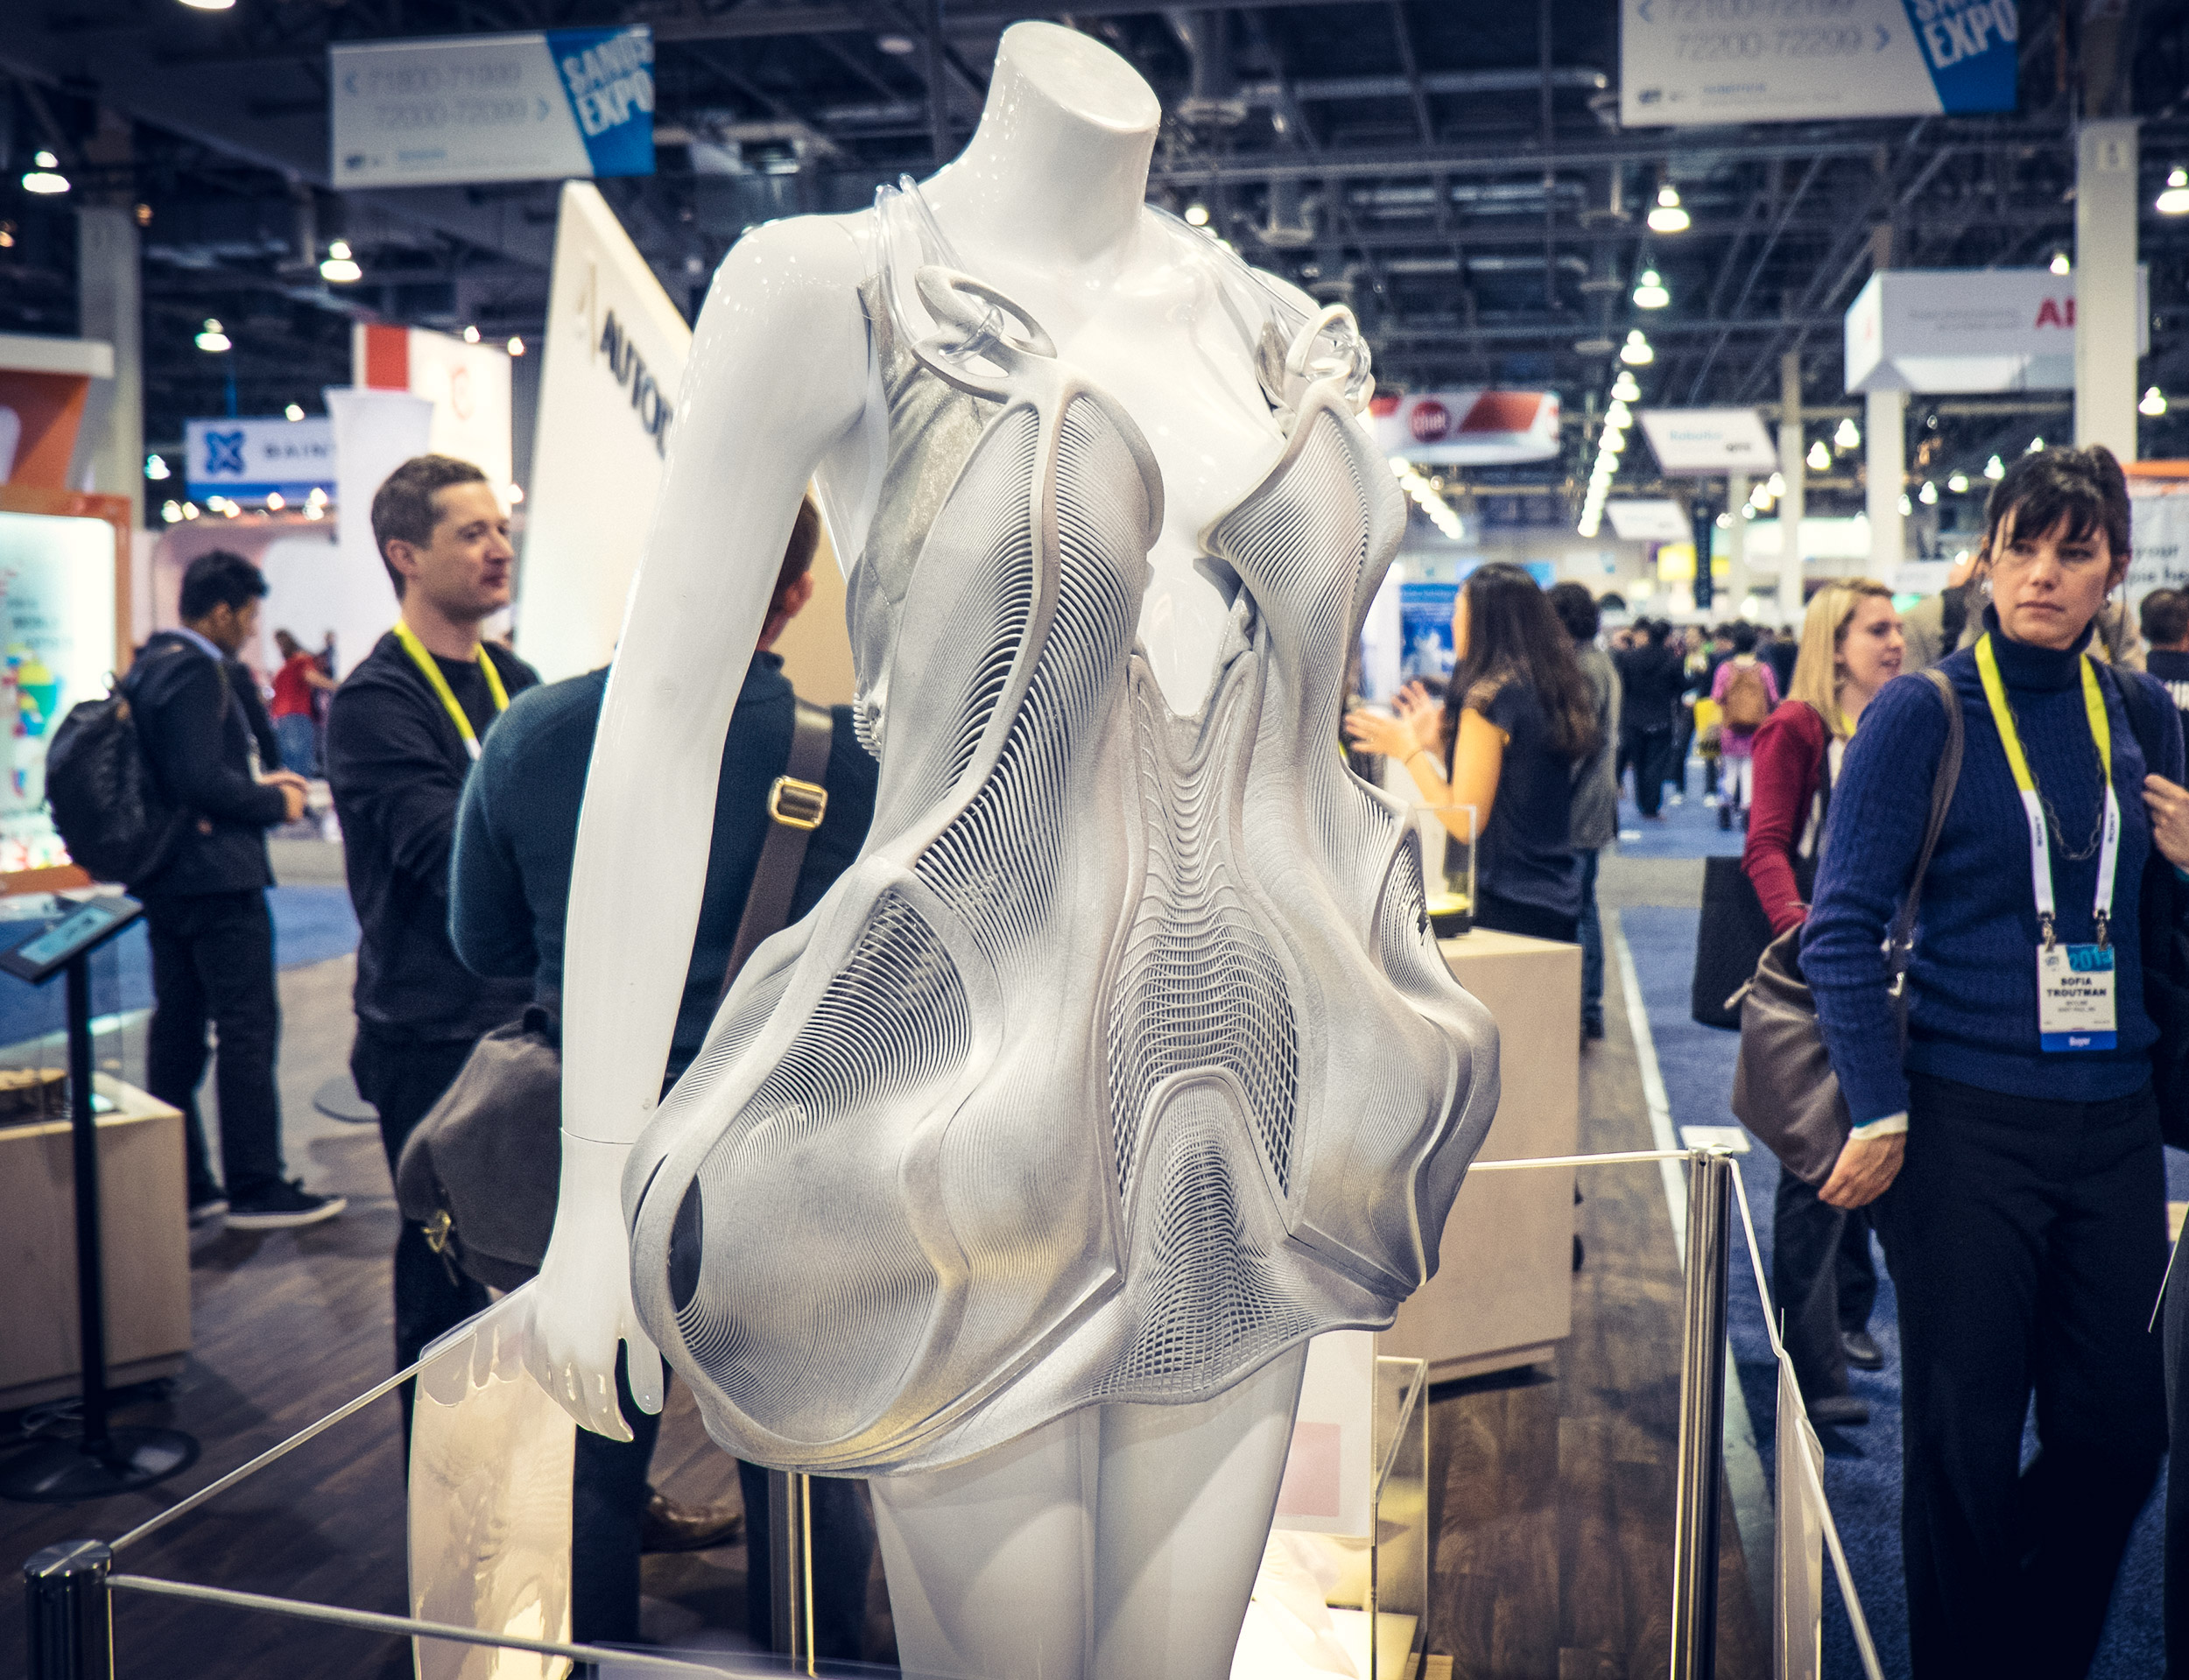 10 of the Most Innovative Designs From CES 2015